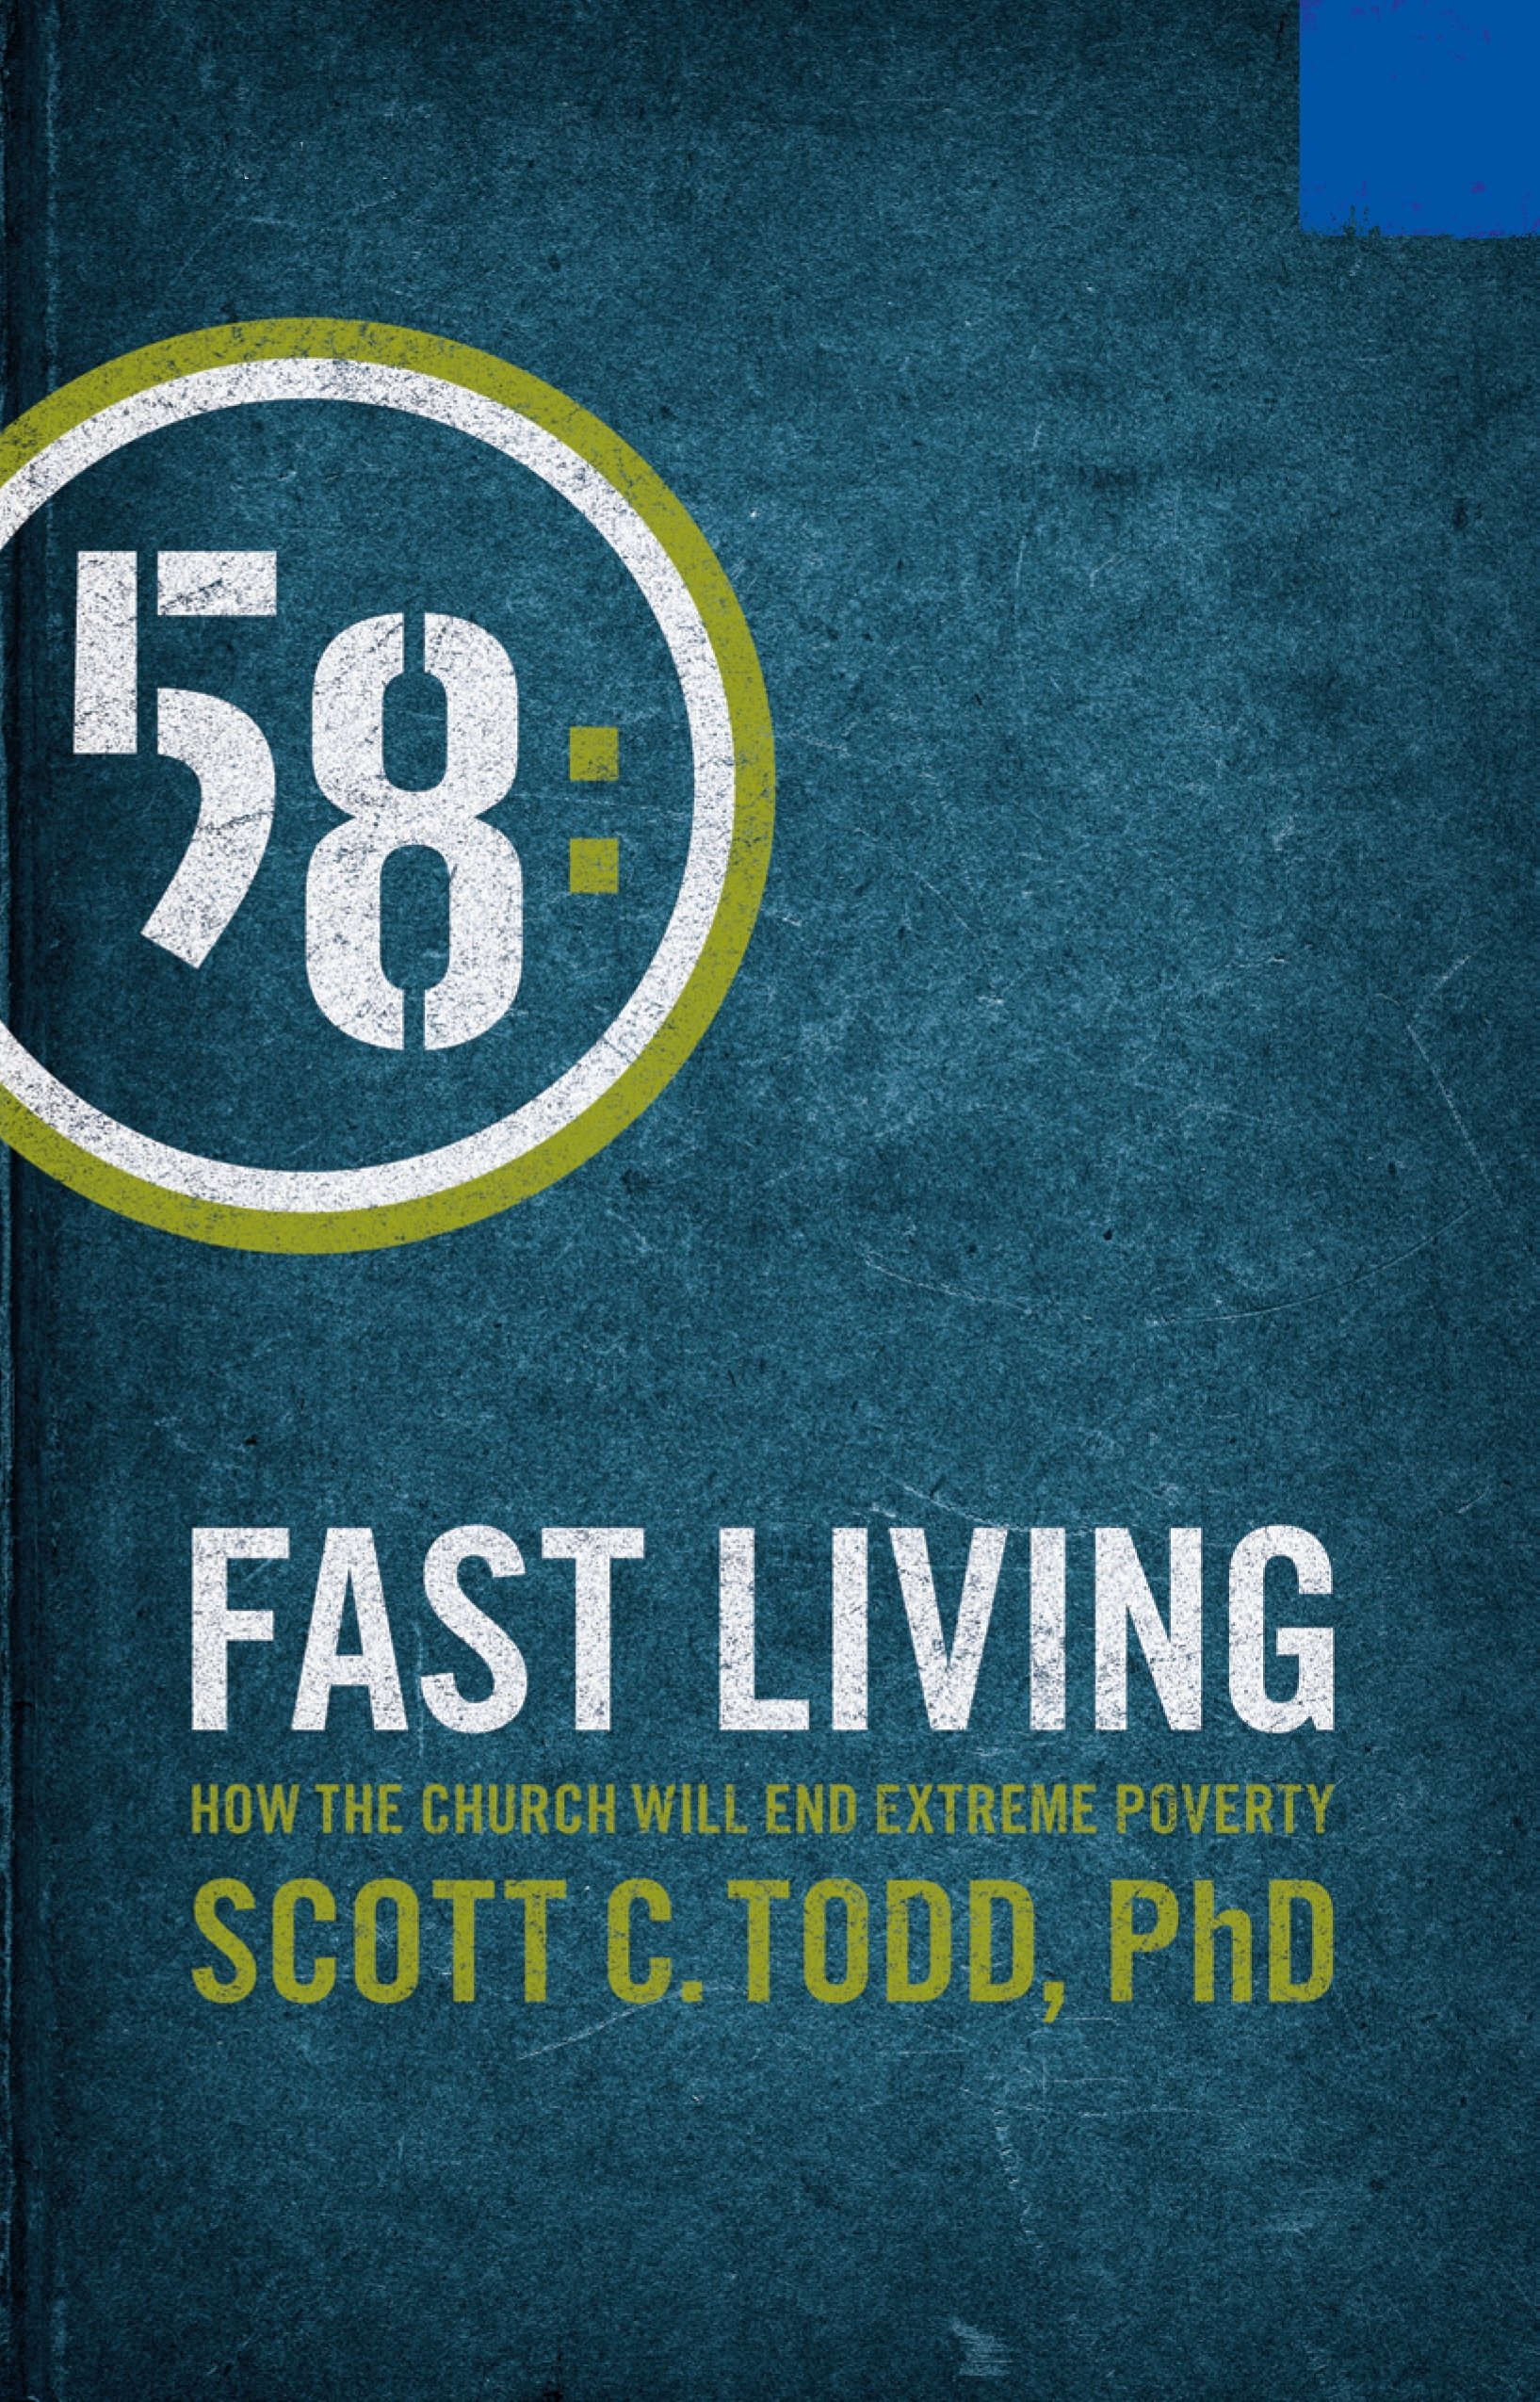 Fast Living: How The Church Will End Extreme Poverty: Scott C. Todd ...